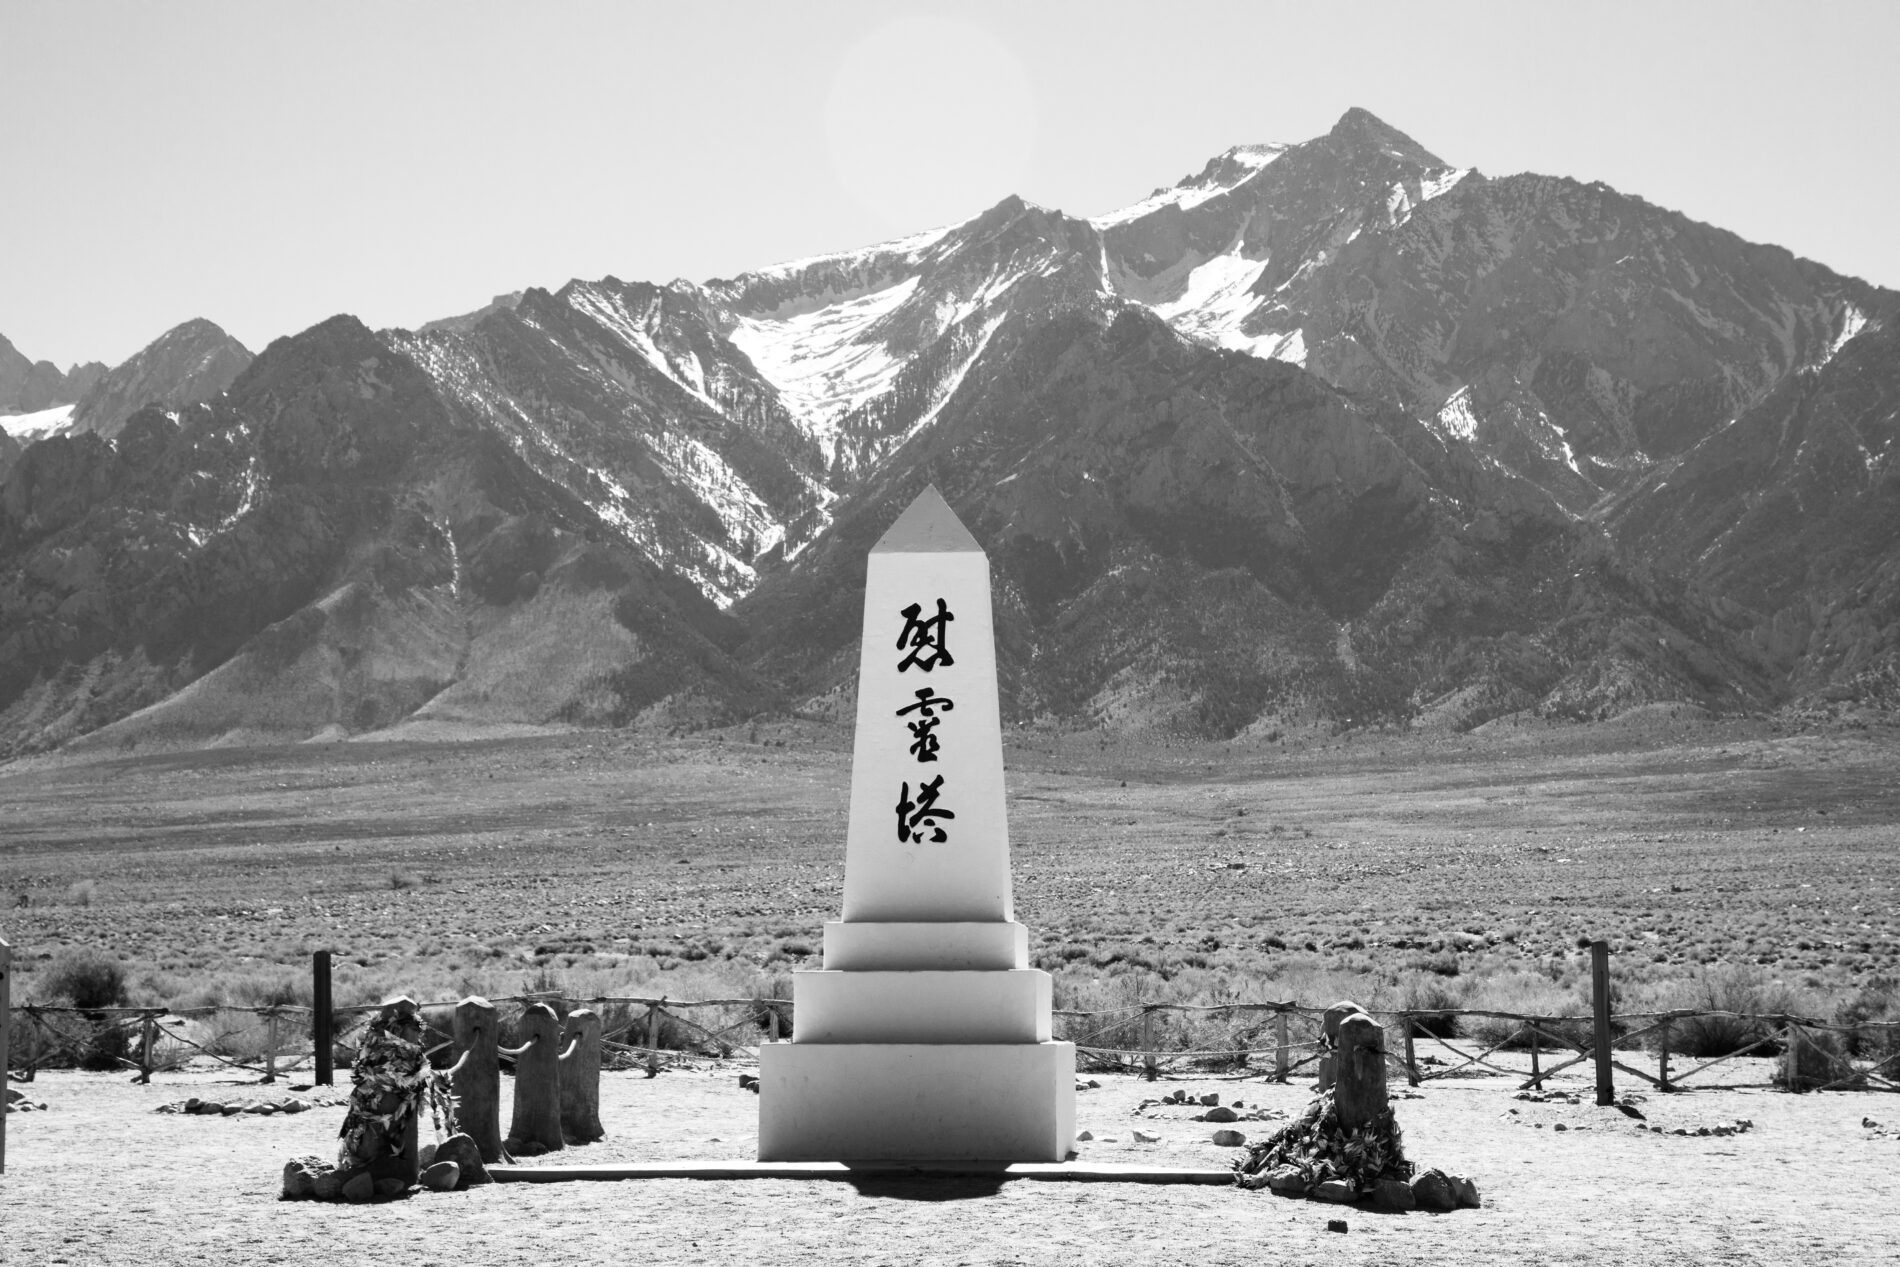 The Japanese Internment Memorial stands proud in the middle of the cemetery.